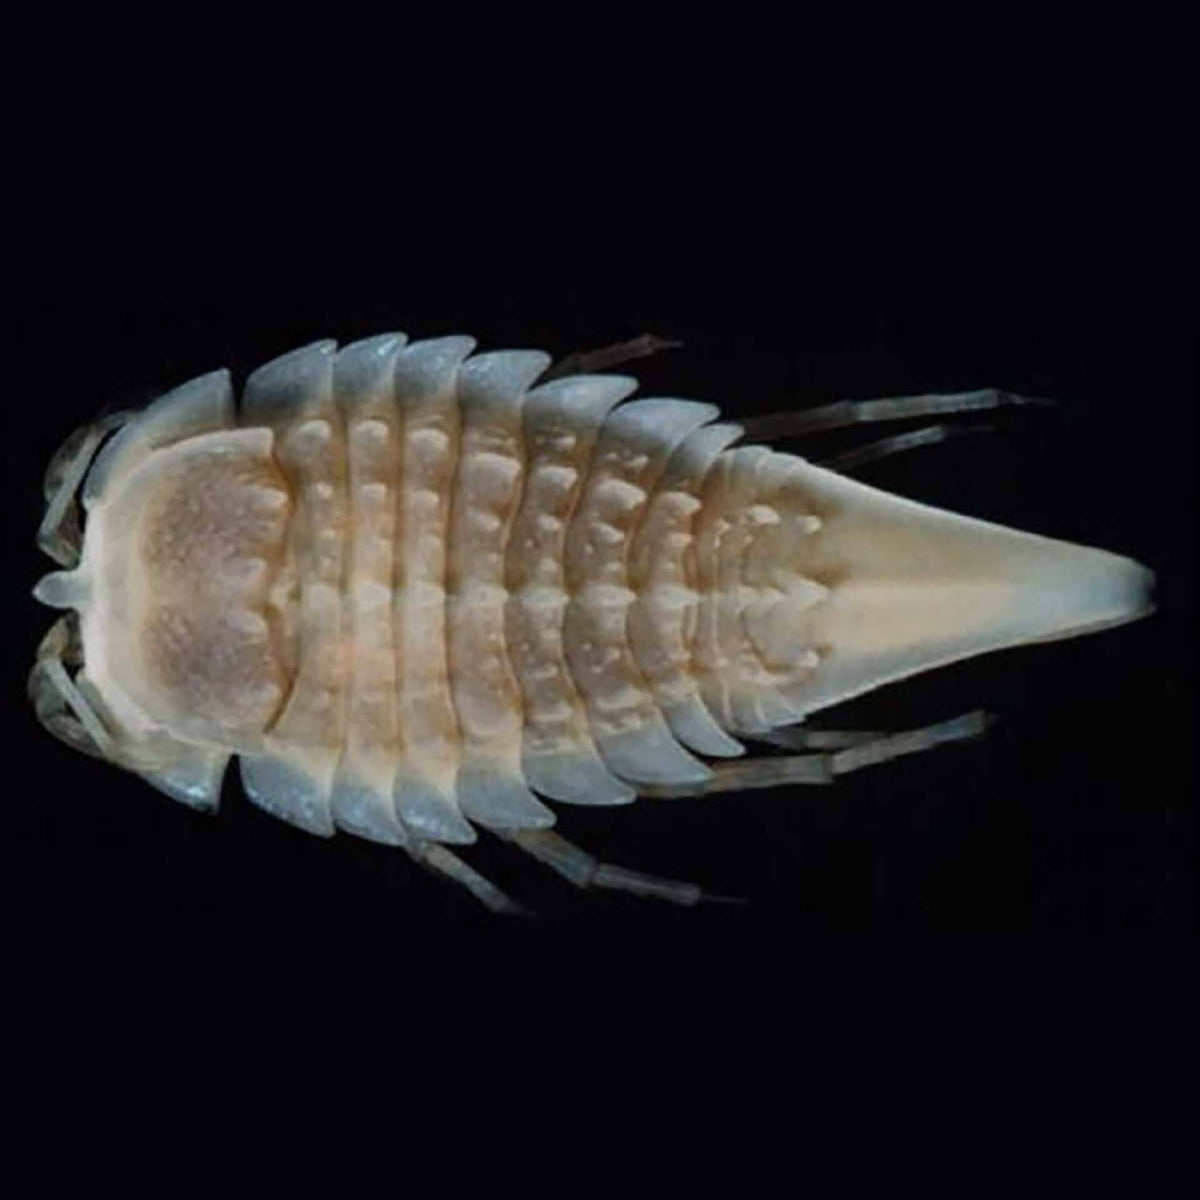 Aquatic Live Food Marine Isopods - Live Food - Instore Pick Up Only